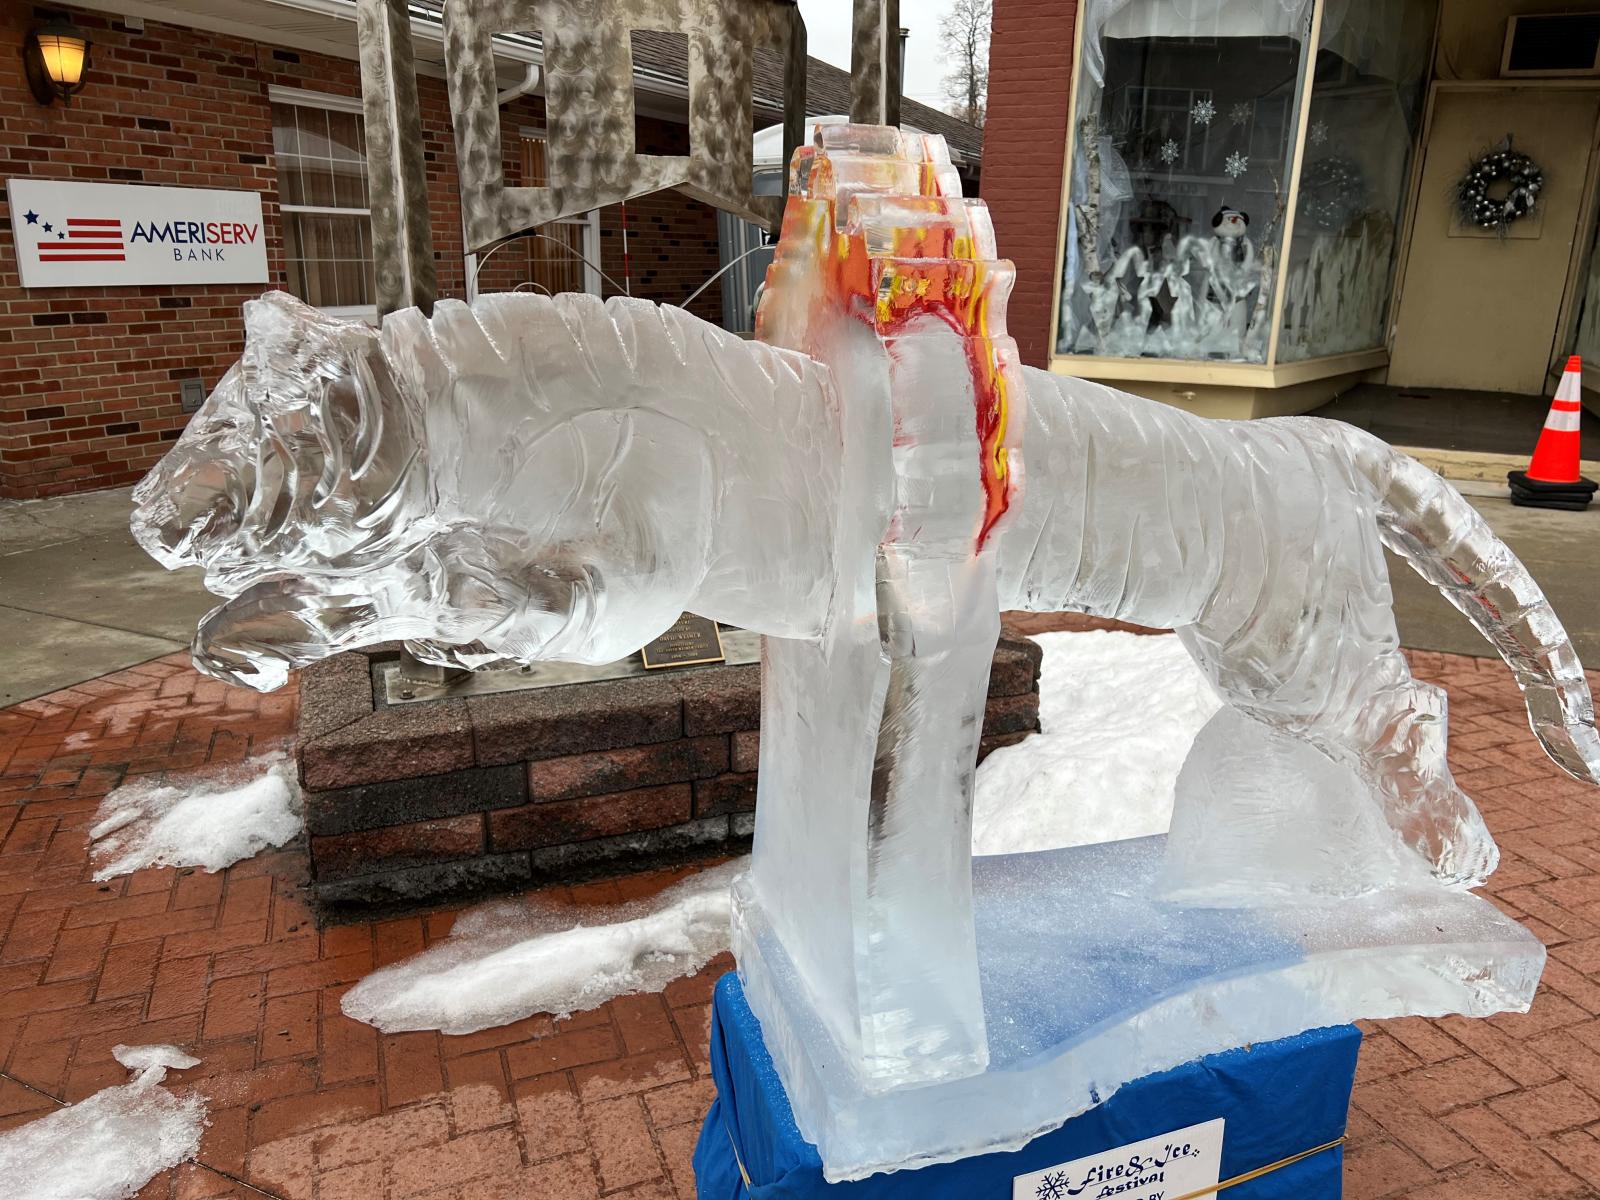 Fire & Ice is a decades-long tradition in Somerset